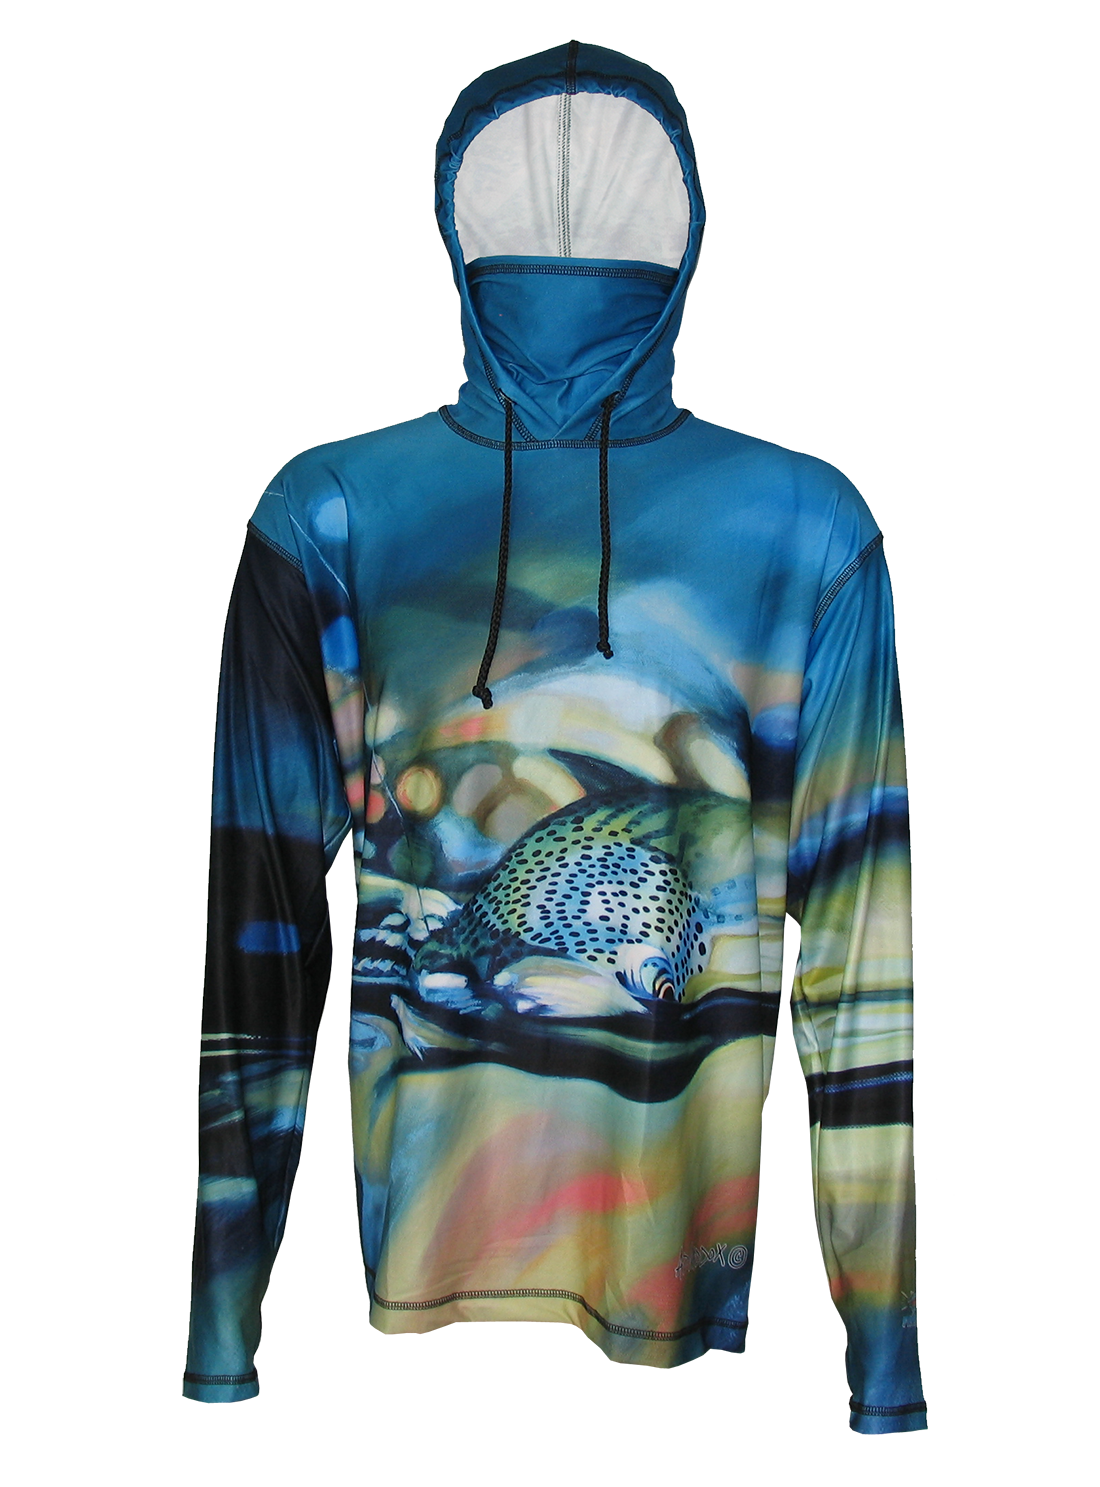 Hoodie Fly Fishing Apparel Took the One Rainbow Trout A D Maddox bring the action of a Rainbow trout taking your dry fly the built in face mask bring great protect on the river, backpacking trail hiking, mountain biking, trail running, or other outdoor activity